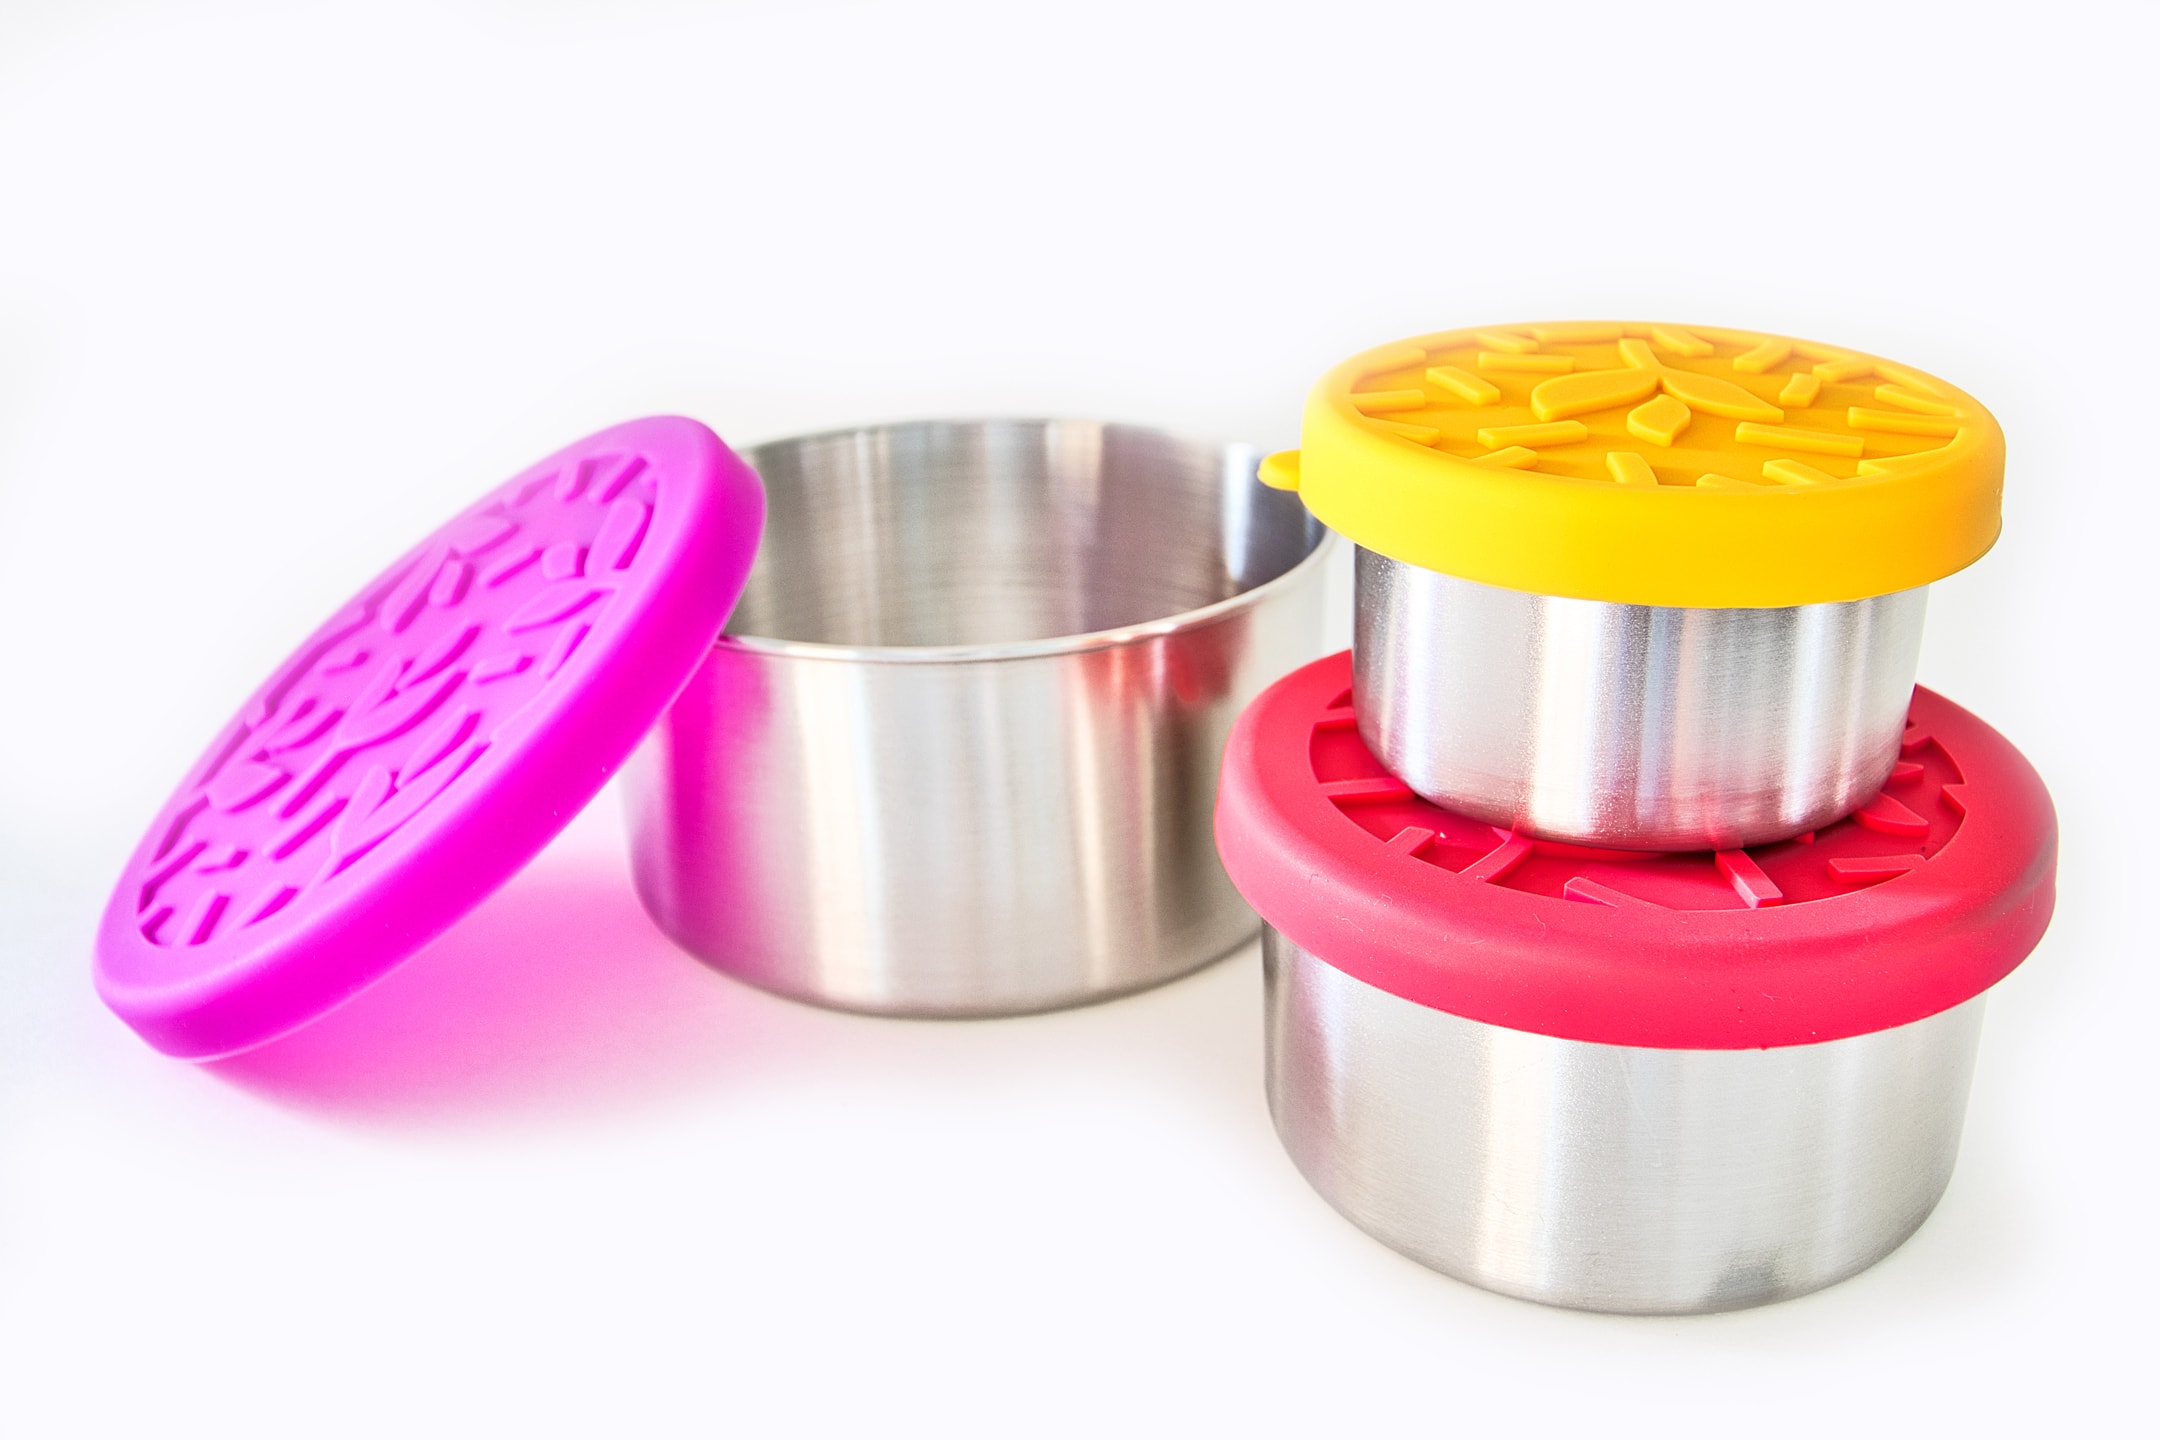 Snack Containers for On The Go  Top Recommended ZoLi Snack Tower